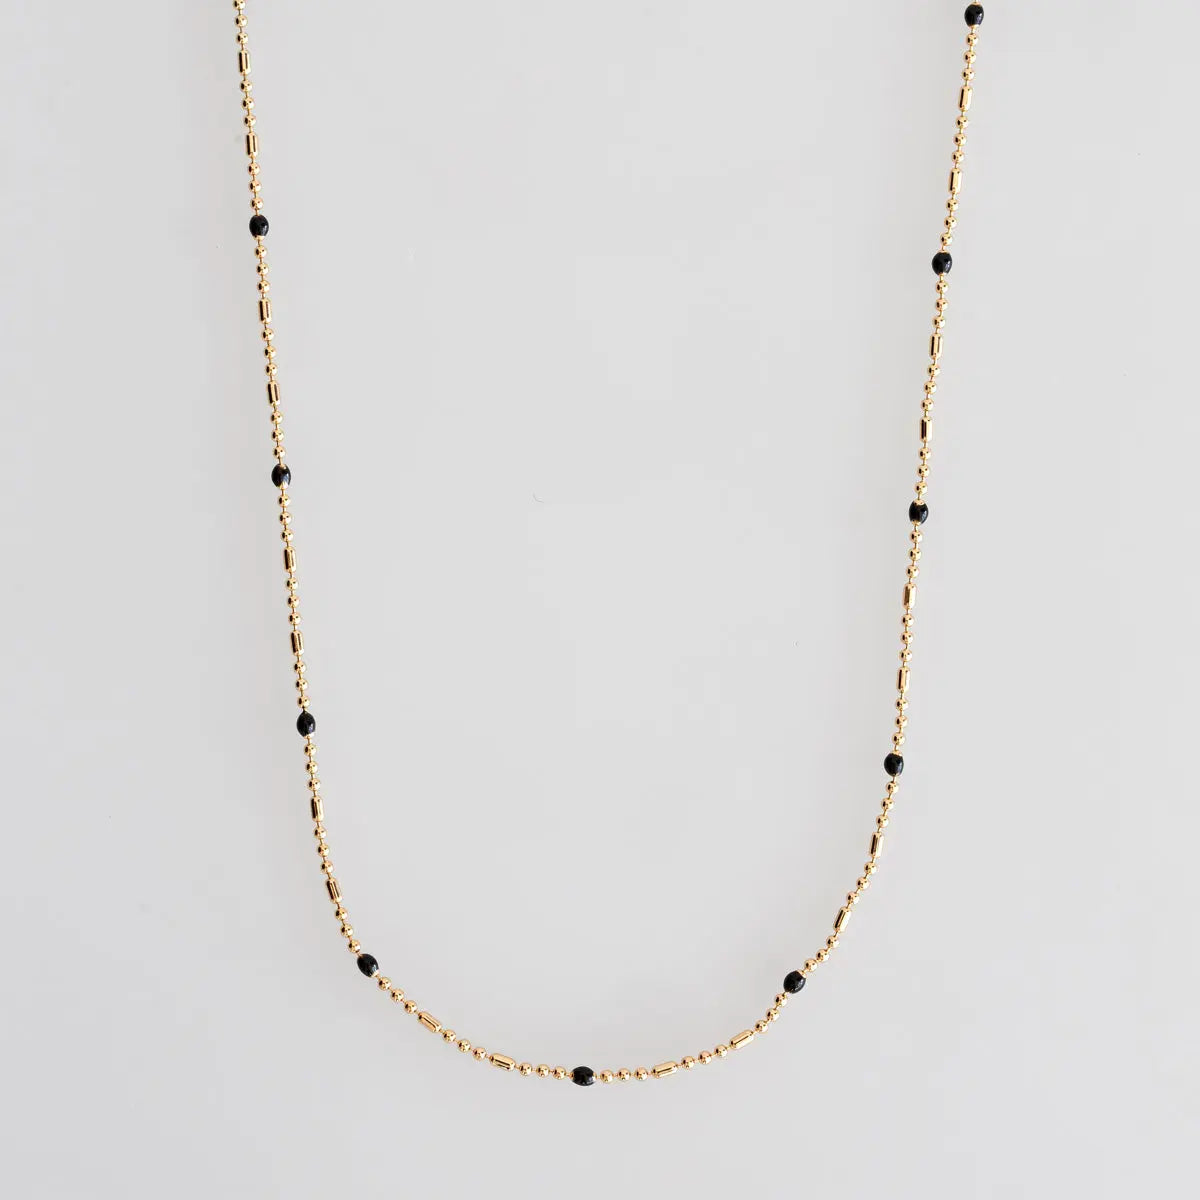 Bead Necklace Minimalistic - Gold and Black